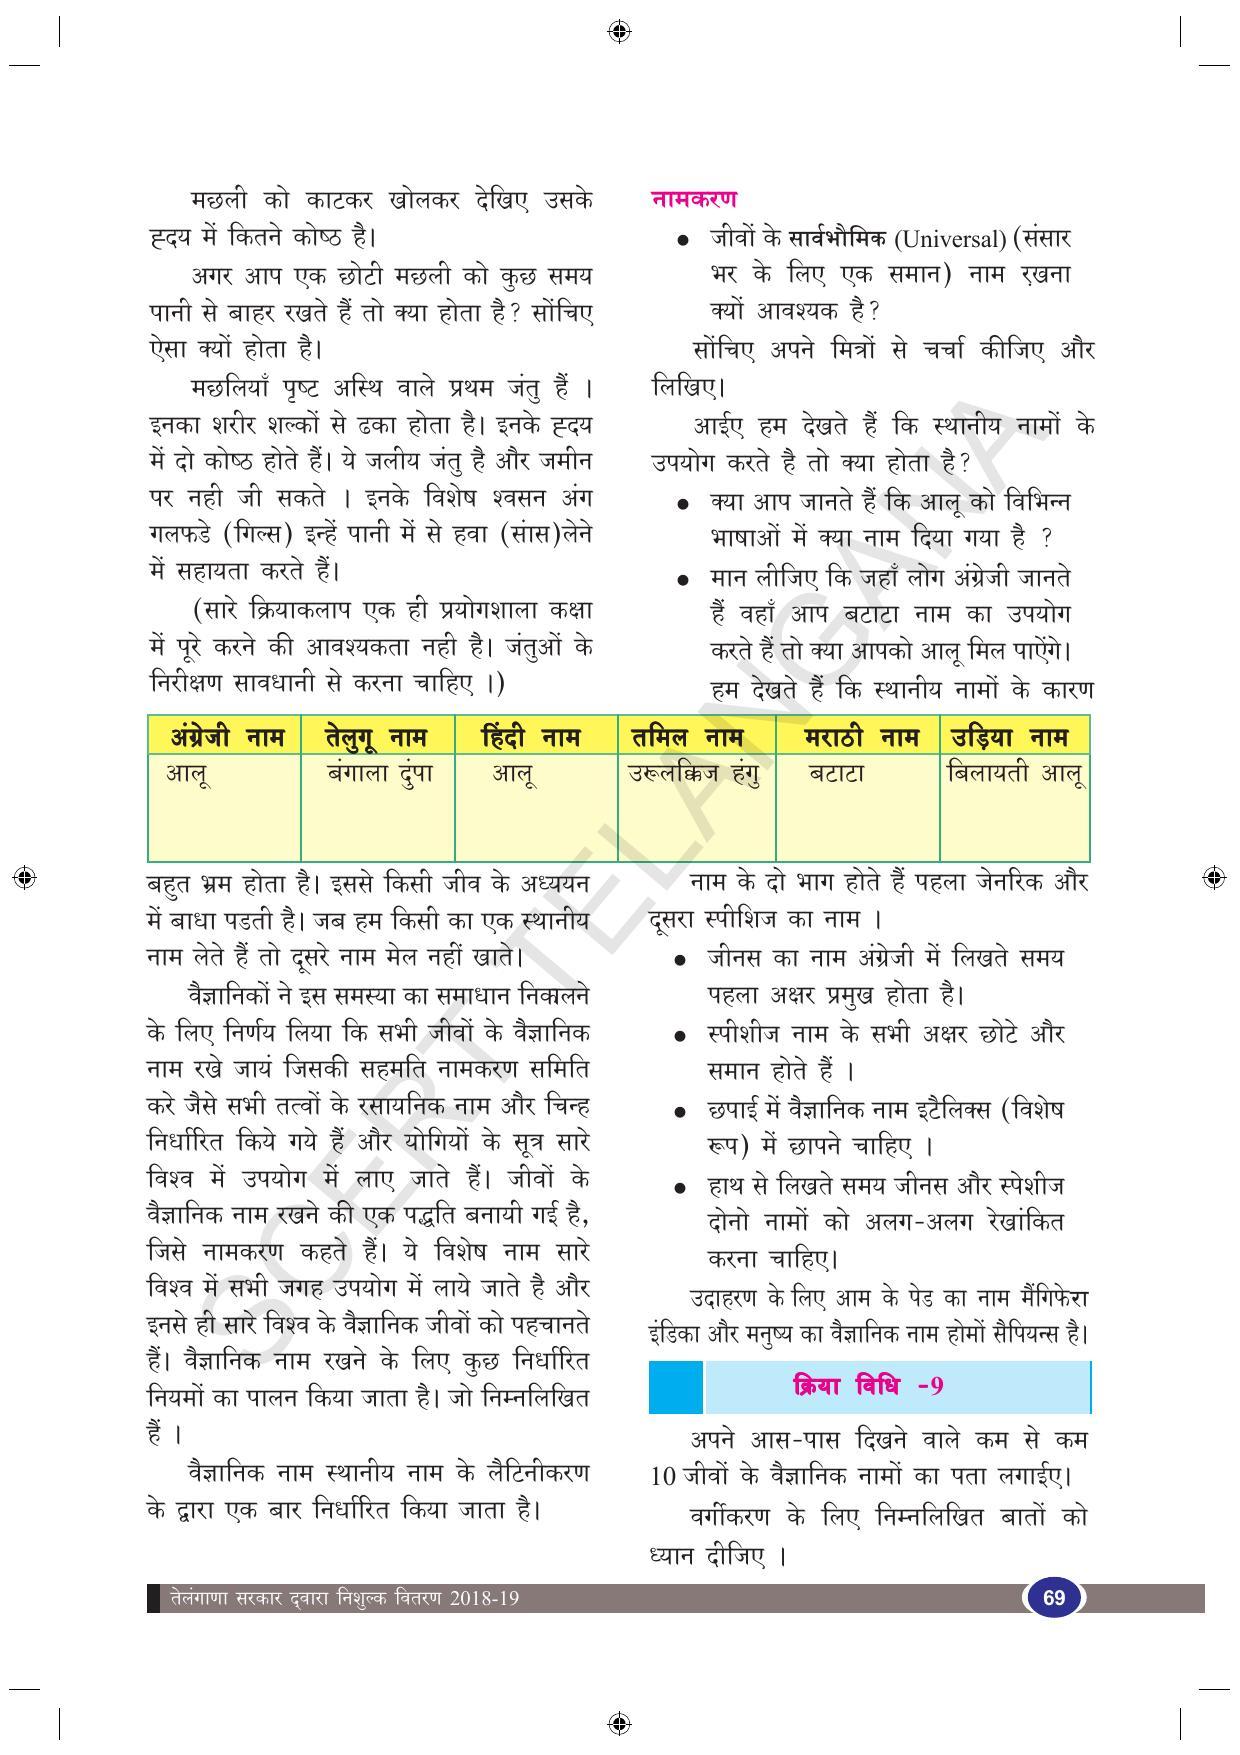 TS SCERT Class 9 Biological Science (Hindi Medium) Text Book - Page 81